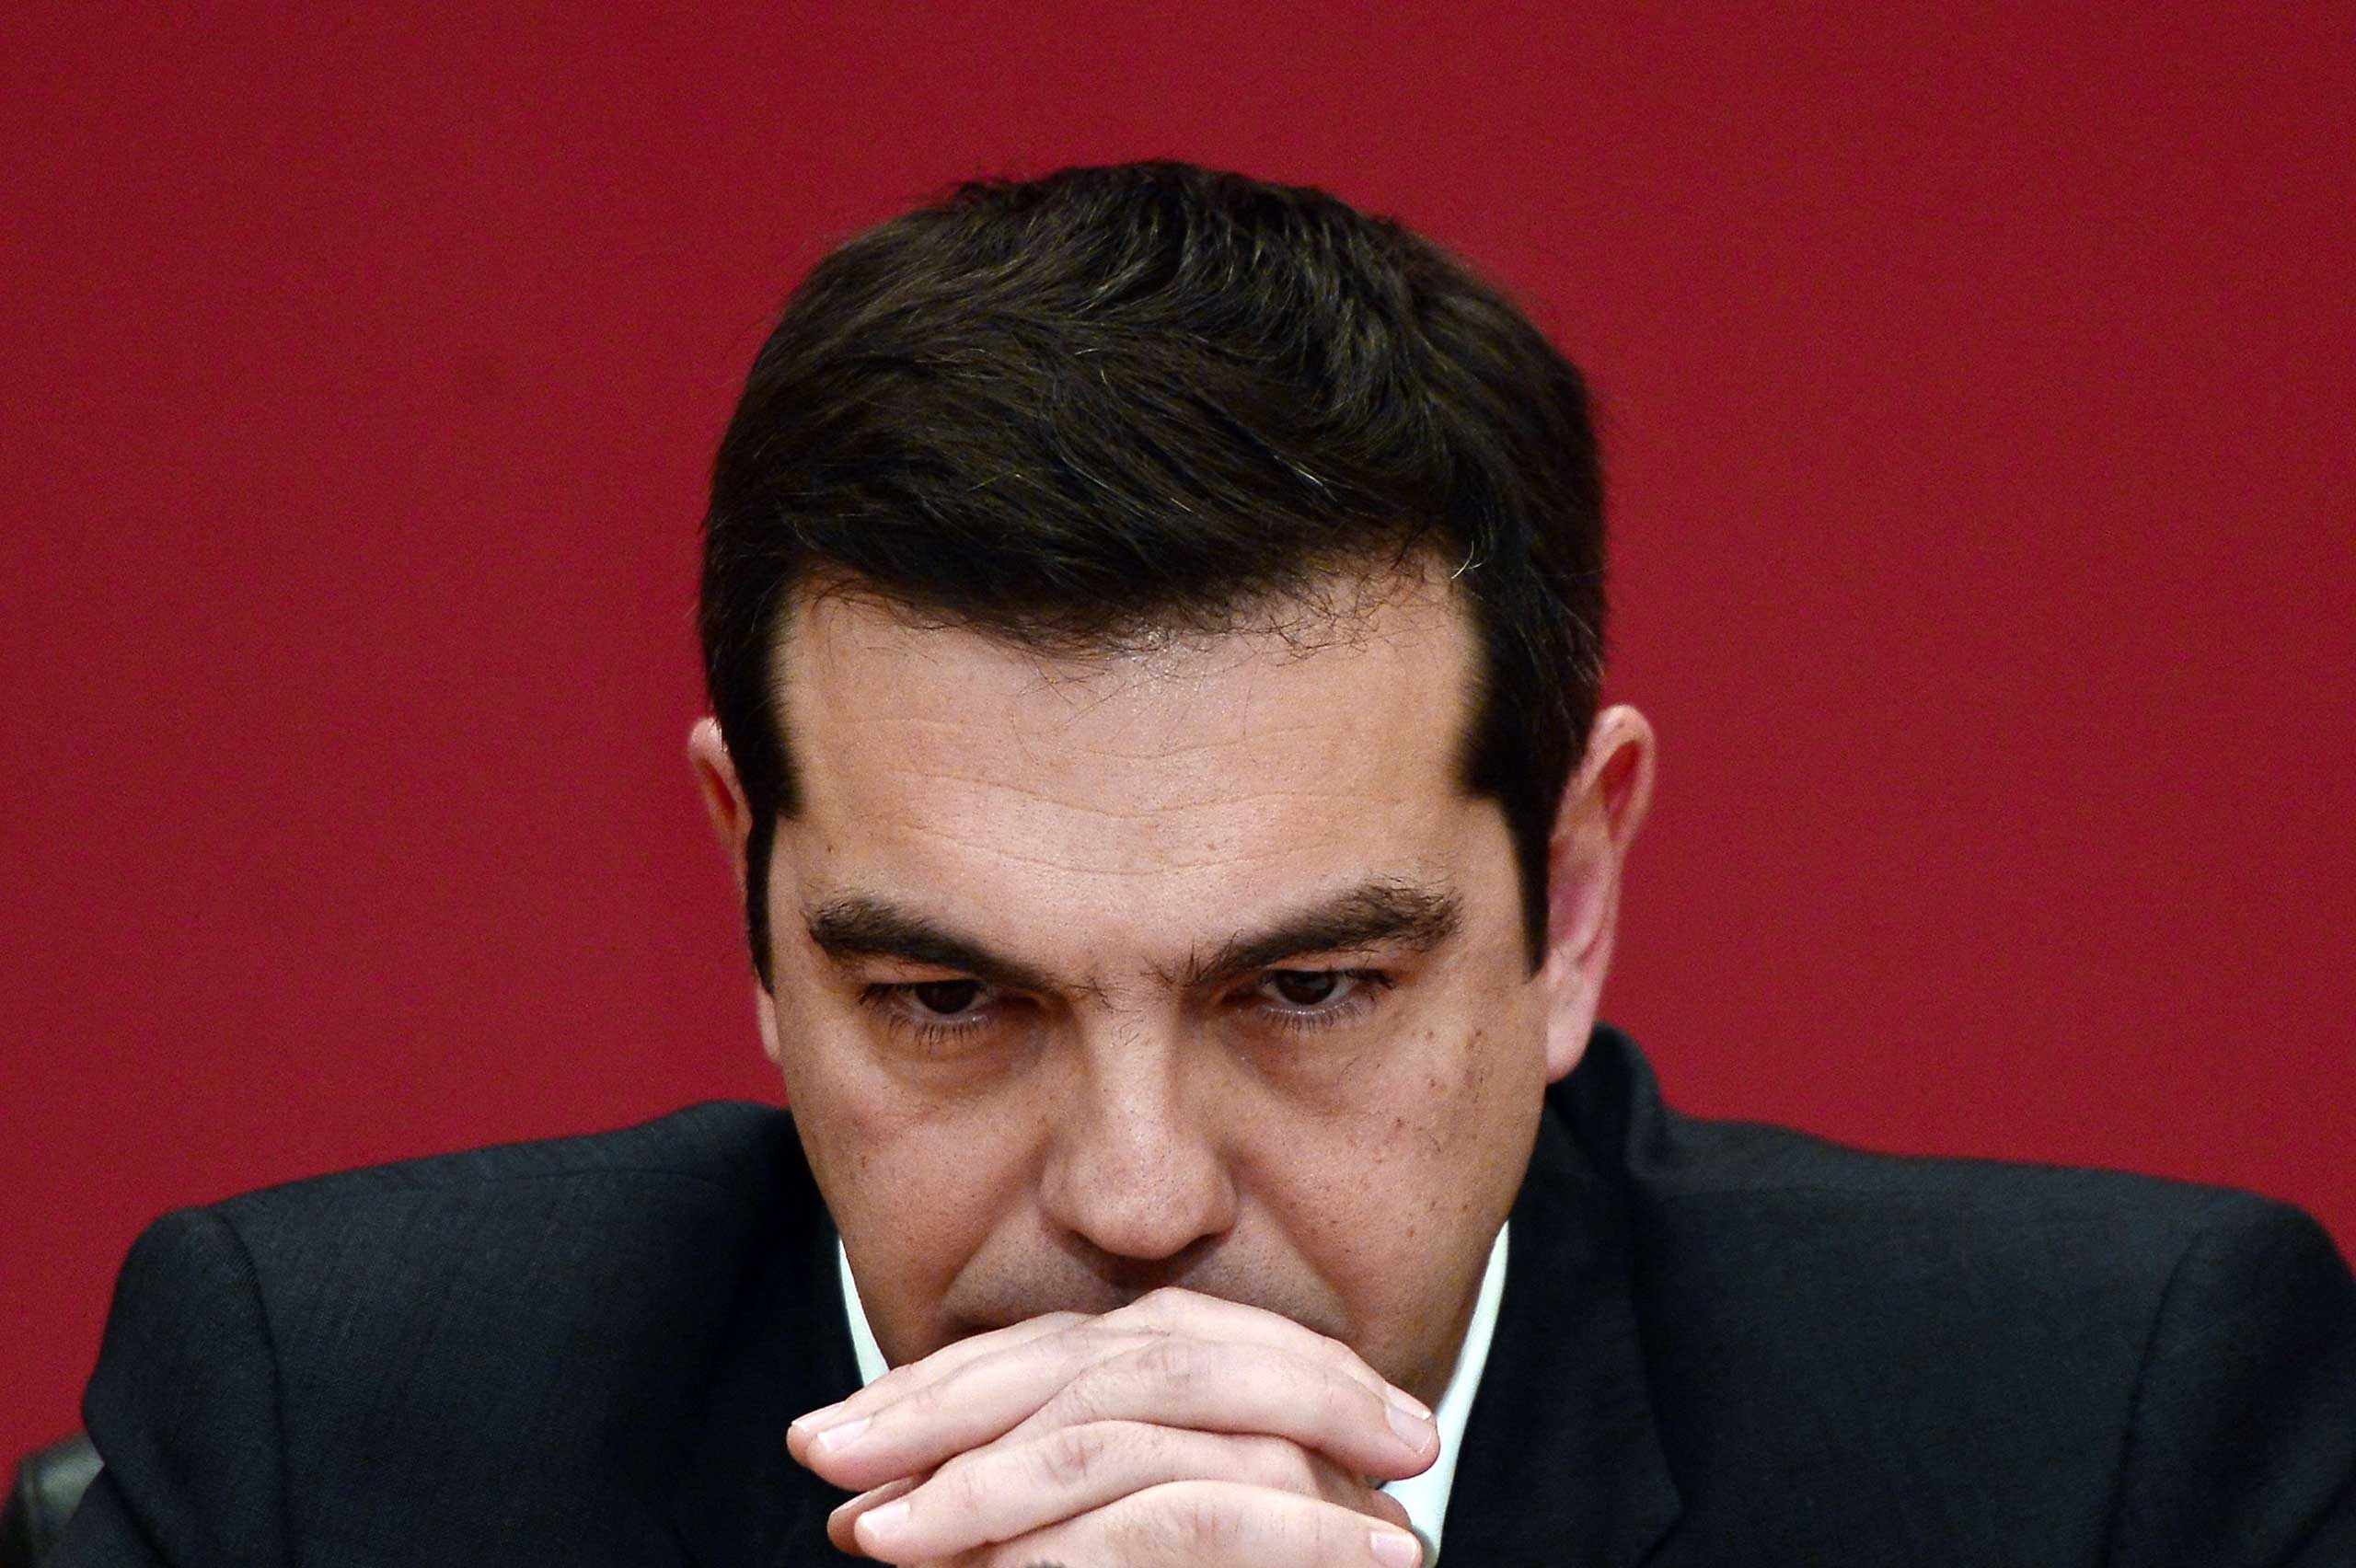 The leader of Syriza party, Alexis Tsipras, listens to a question during a televised press conference on Jan. 23, 2015 at the Zappion Hall in Athens. (Louisa Gouliamaki—AFP/Getty Images)